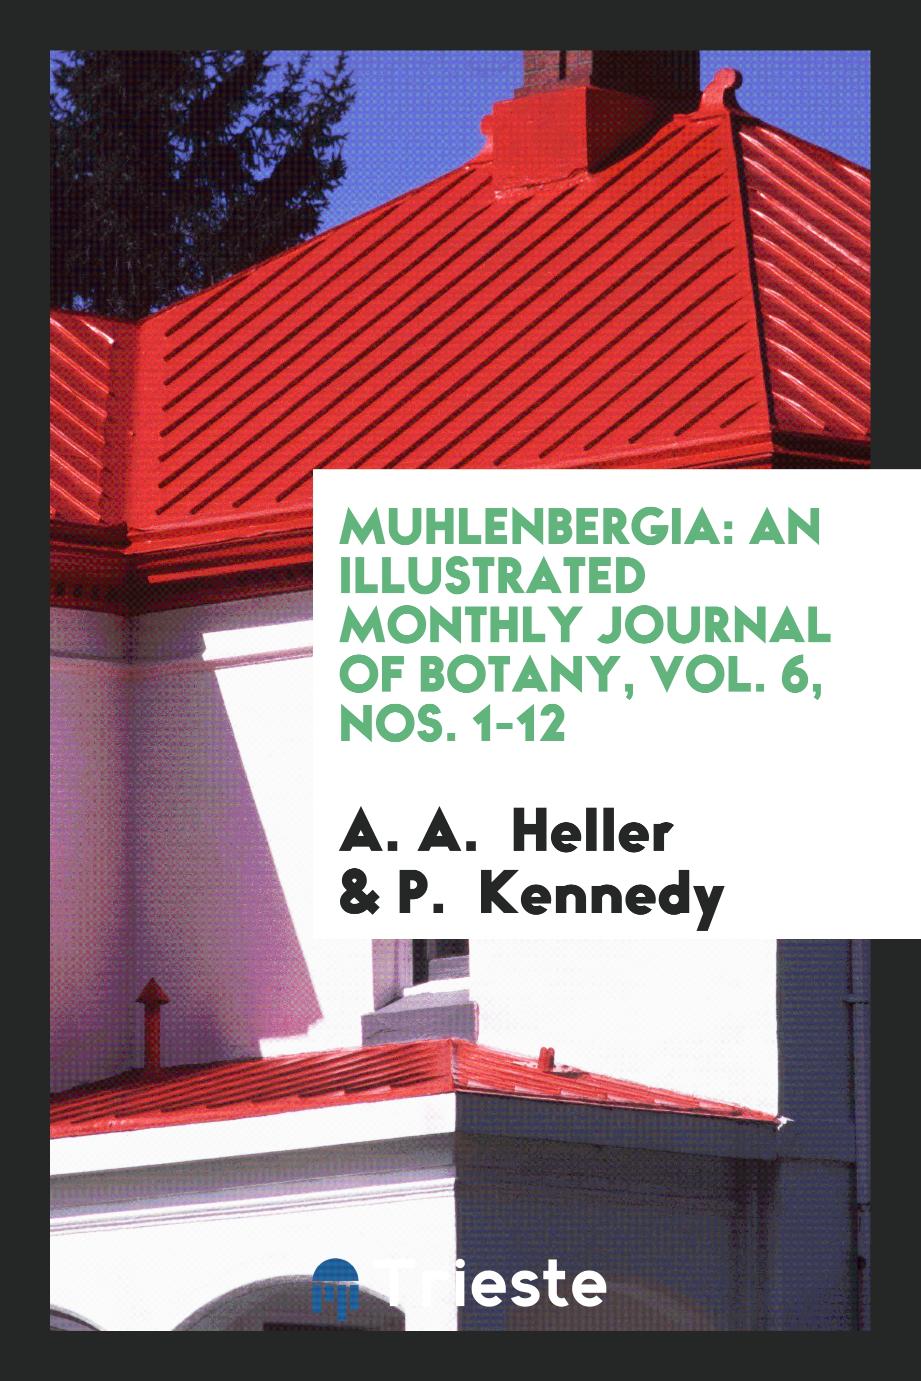 Muhlenbergia: An Illustrated Monthly Journal of Botany, Vol. 6, Nos. 1-12